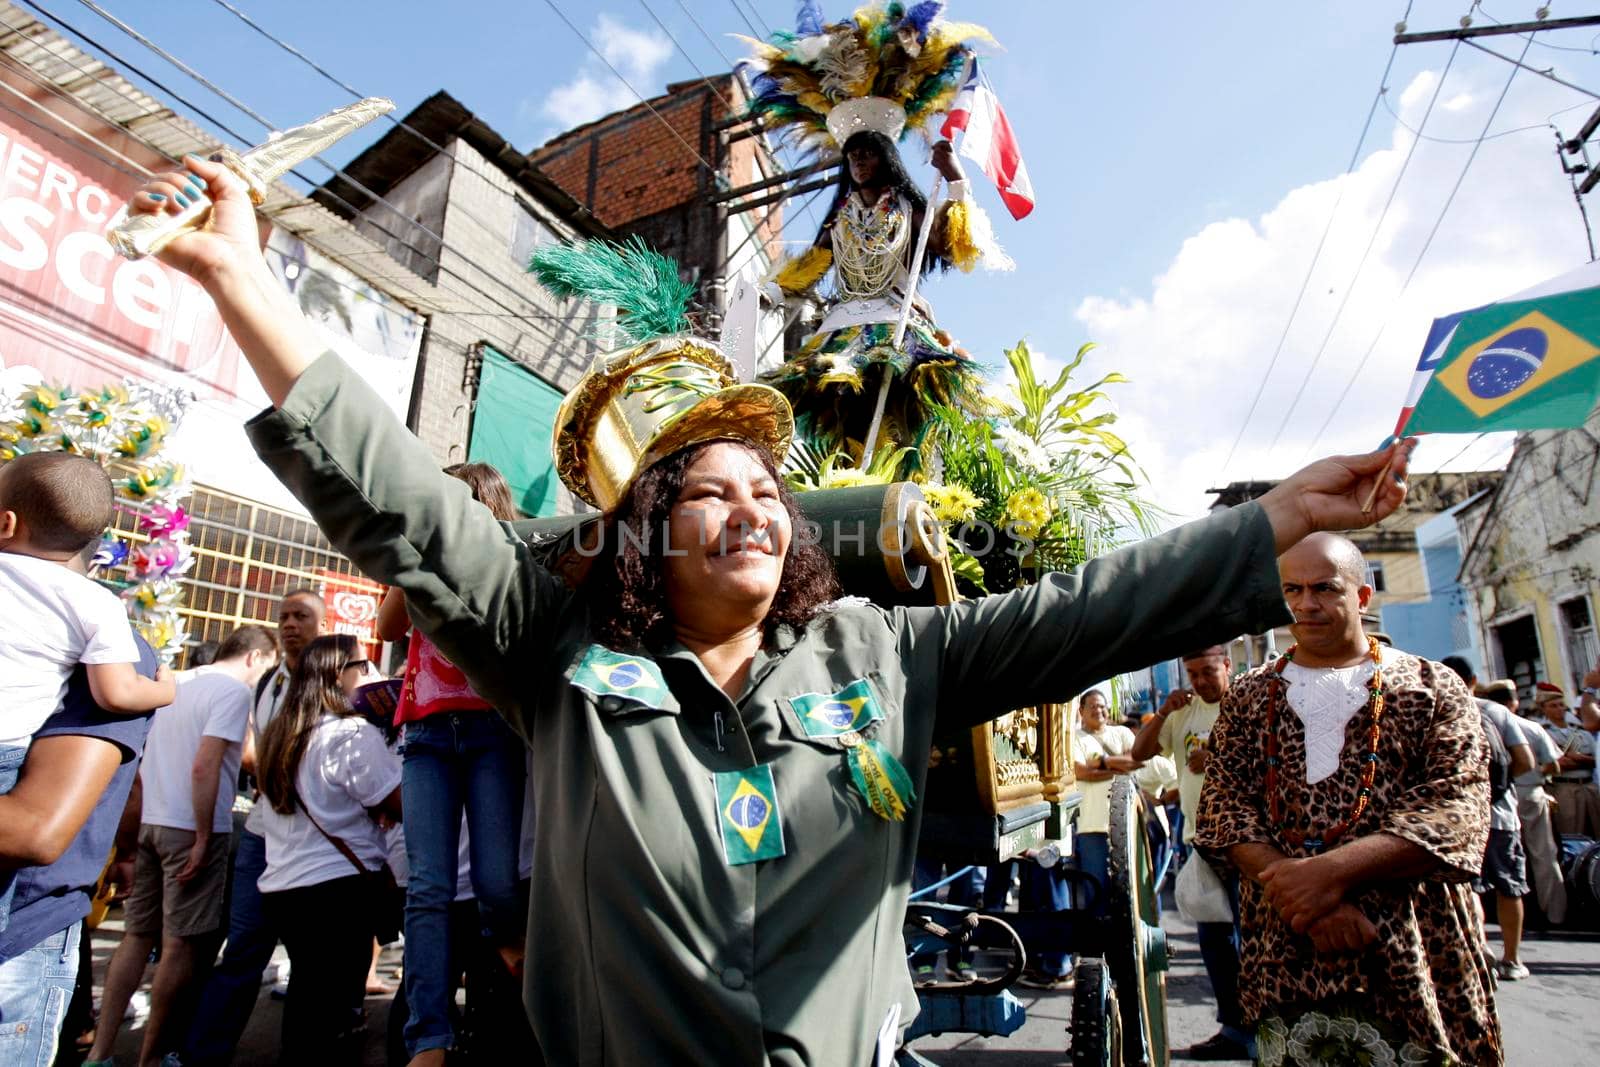 salvador, bahia / brazil - july 2, 2015: person wears the costume of Maria Quiteria, a Bahian character who fought during independence from Bahia. She put on men's clothes to join the Brazilian Army.